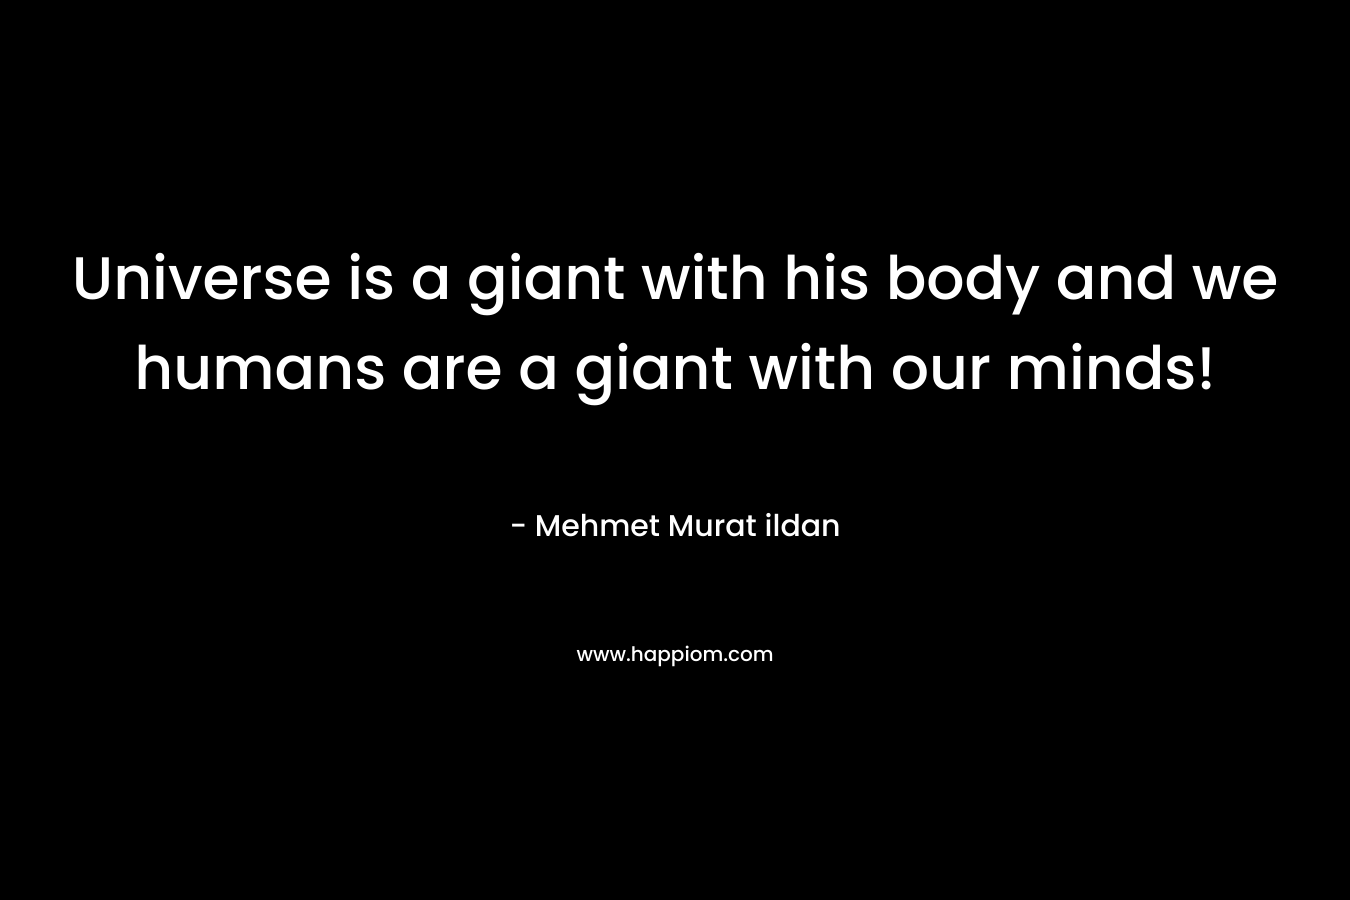 Universe is a giant with his body and we humans are a giant with our minds!